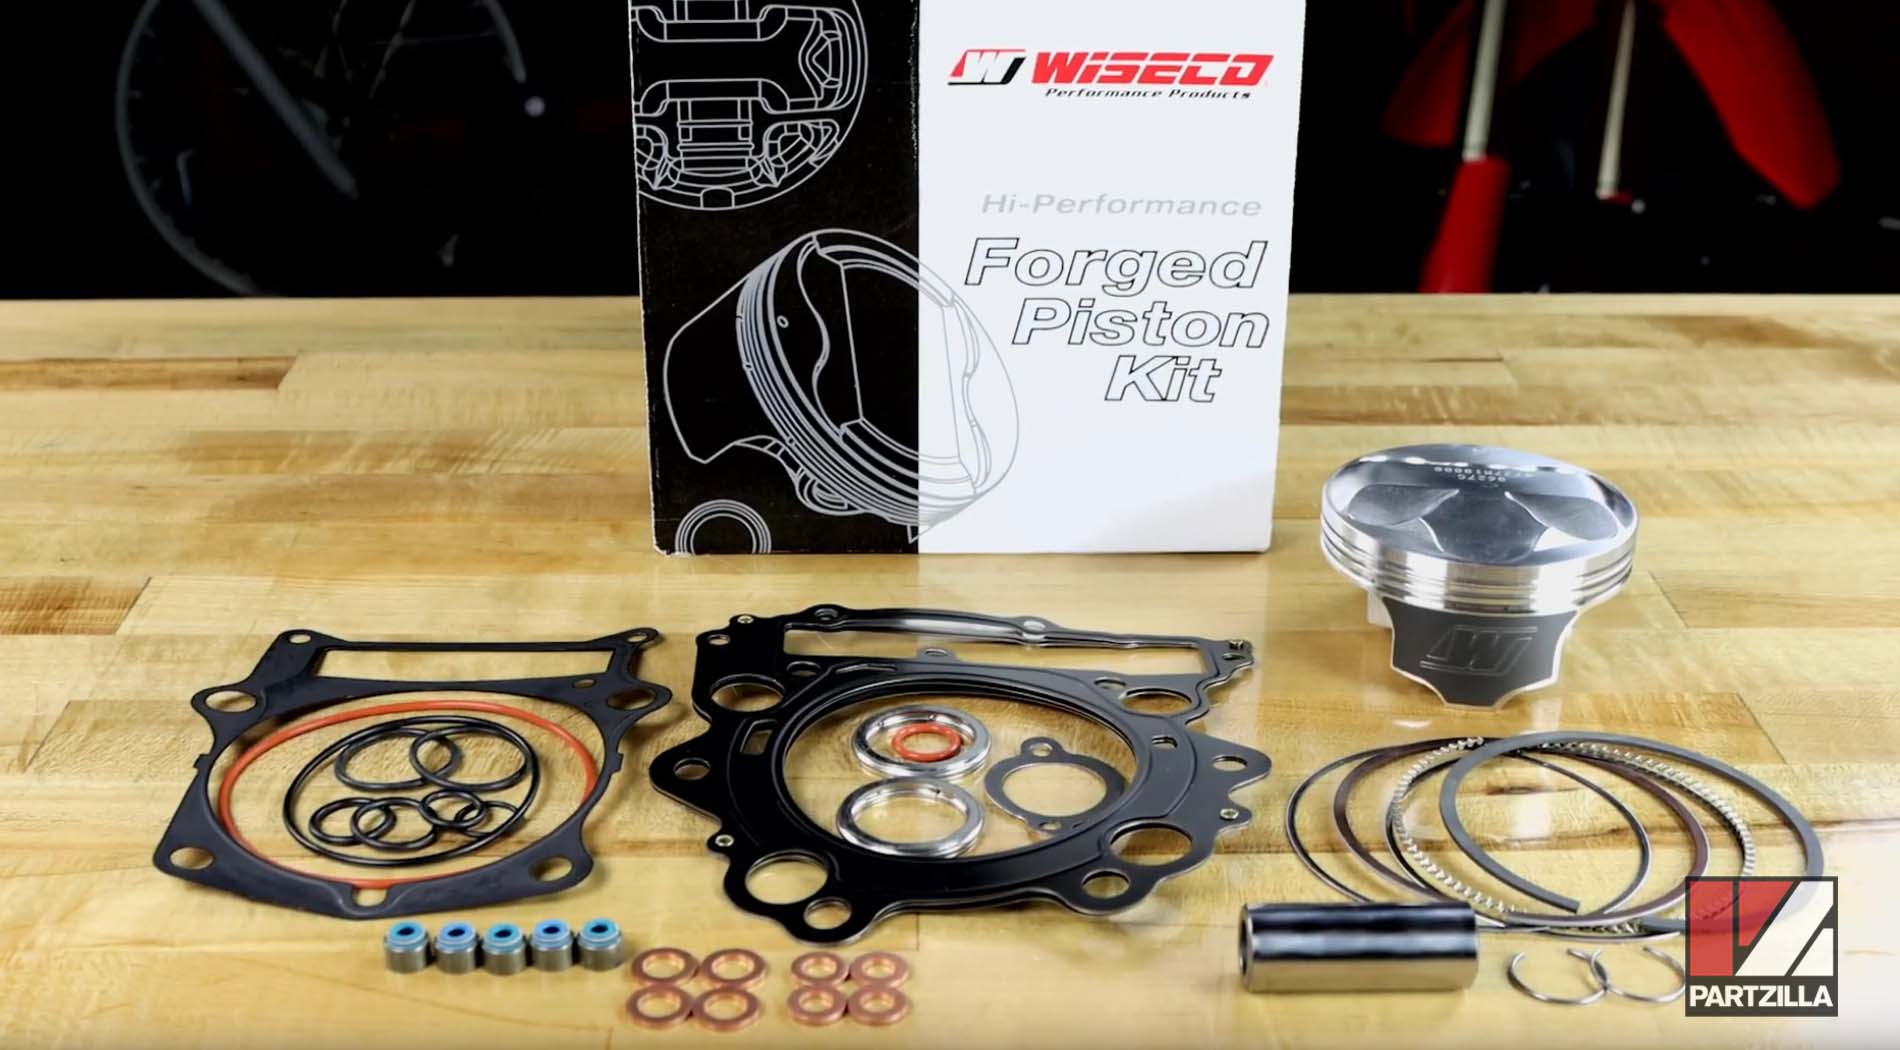 Wiseco forged piston ring kit